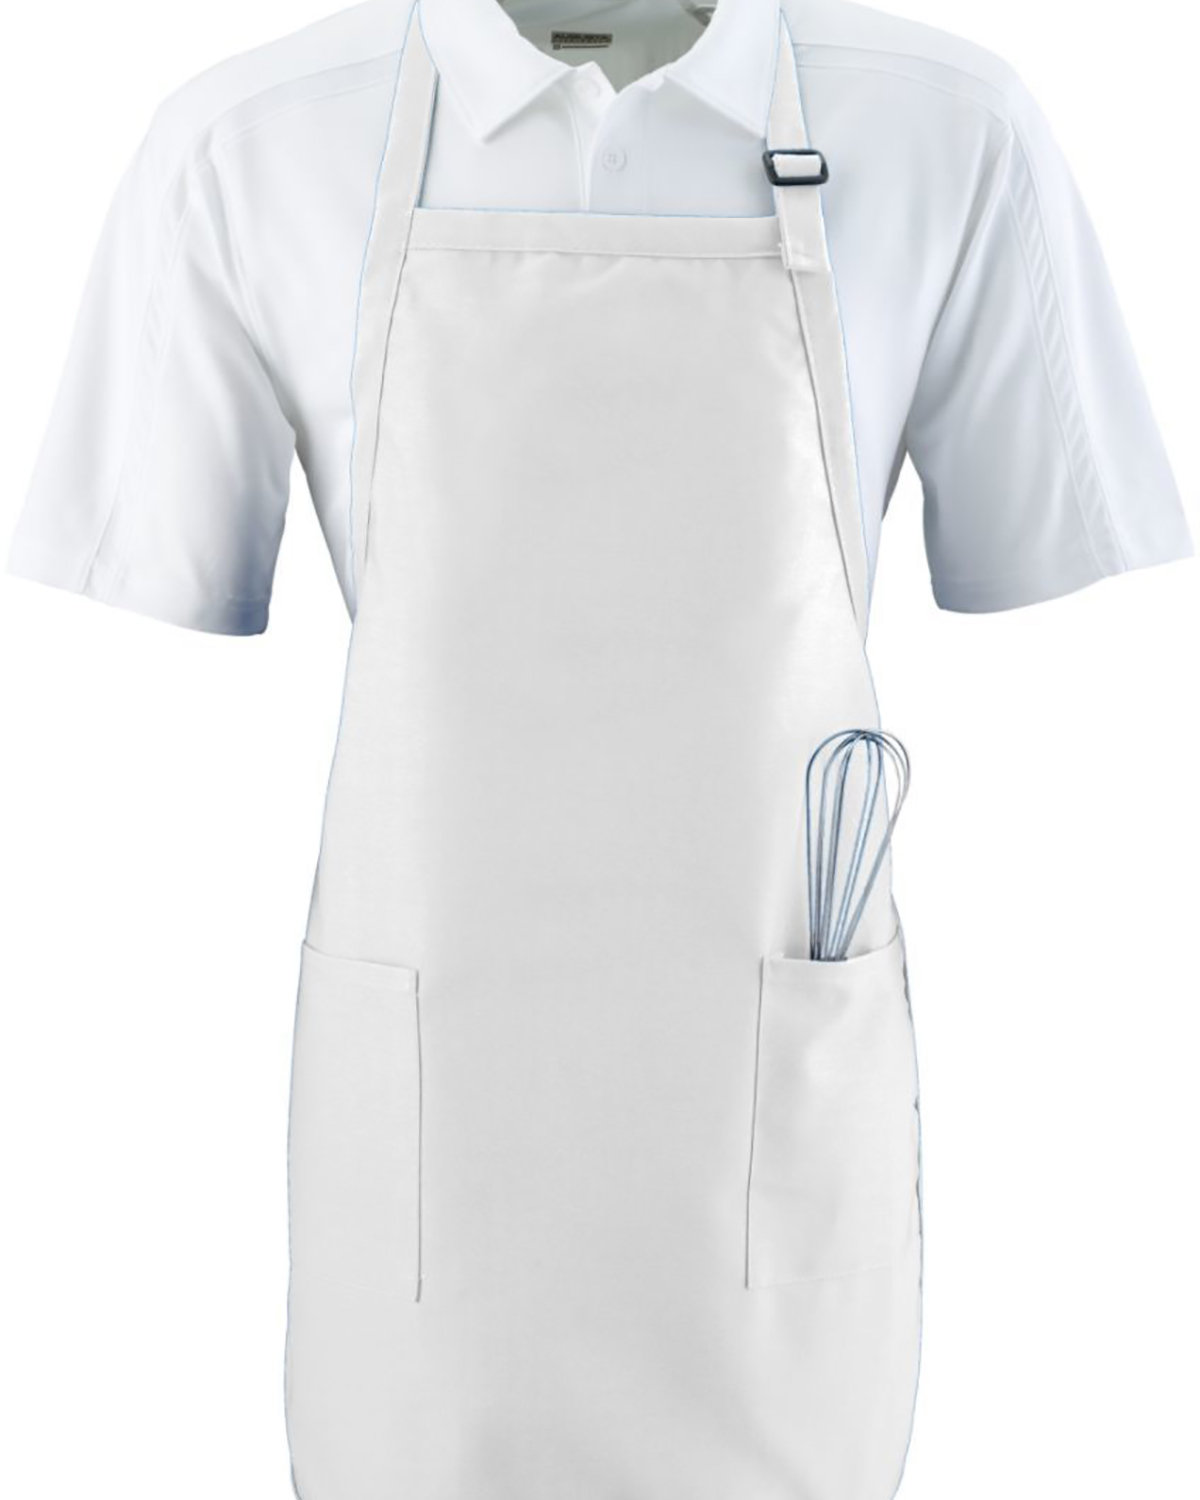 Full Length Apron With Pockets-